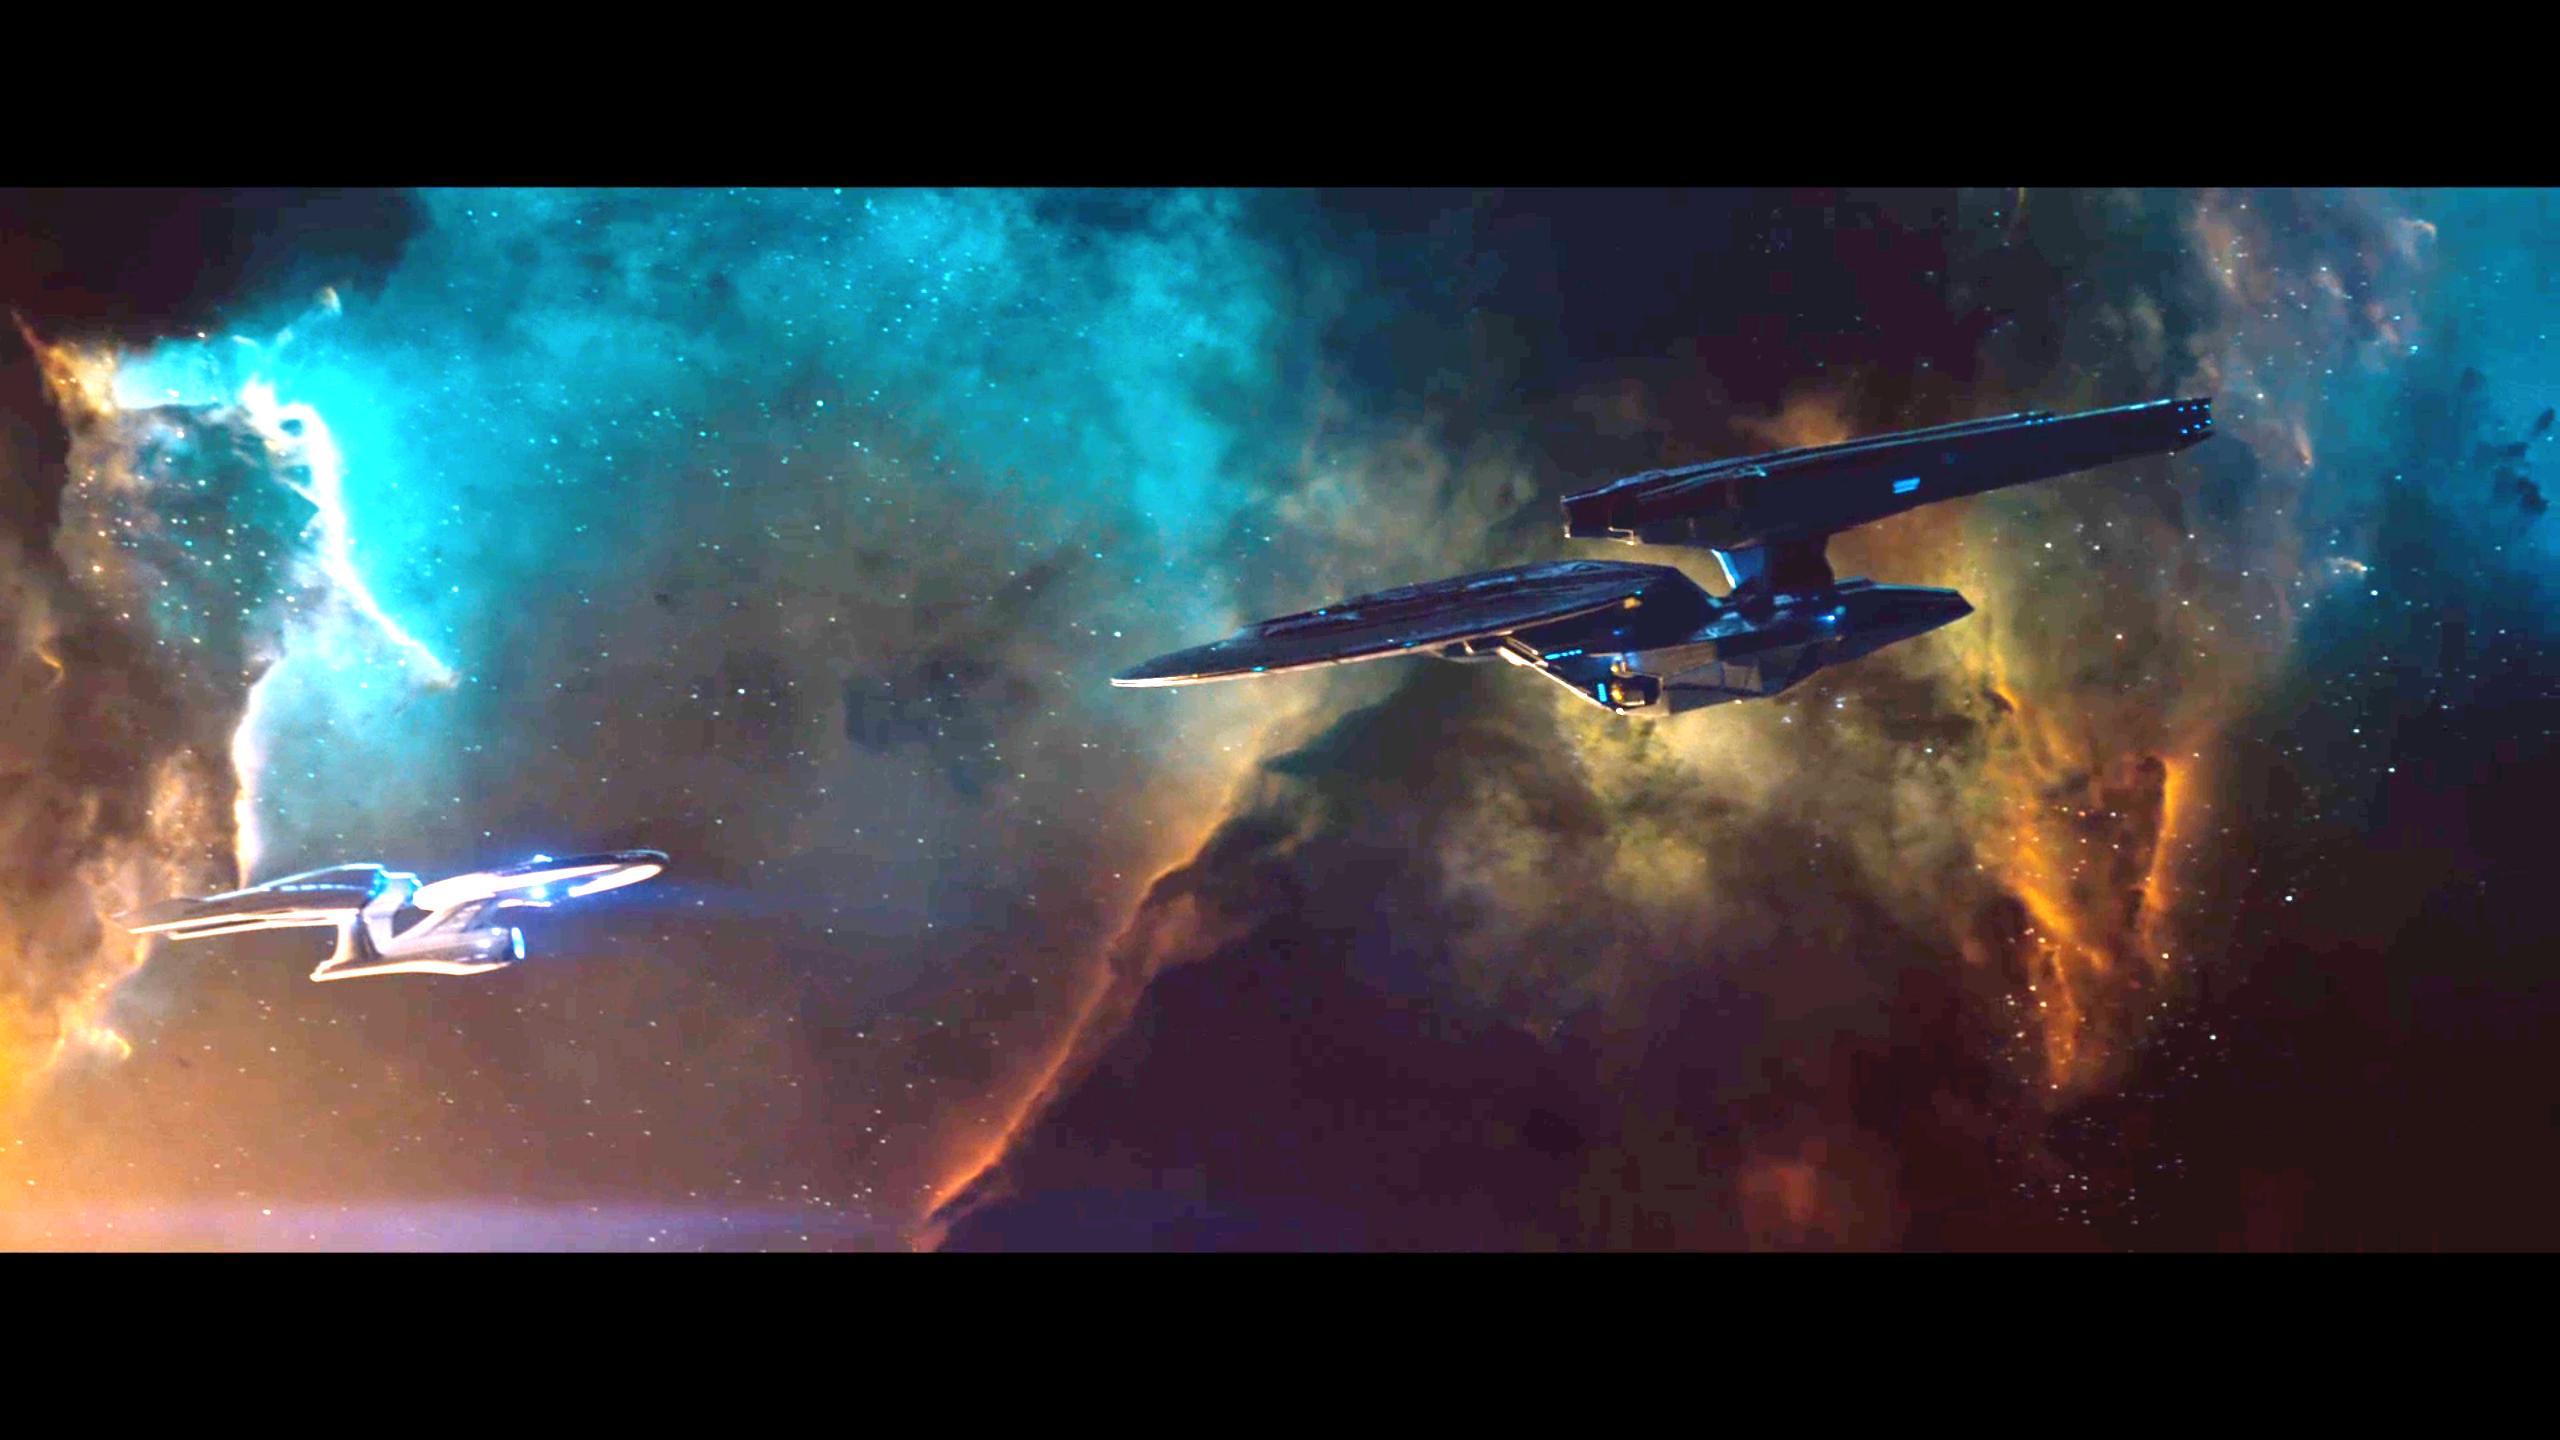 Enhanced image of the mystery ship from the new trailer